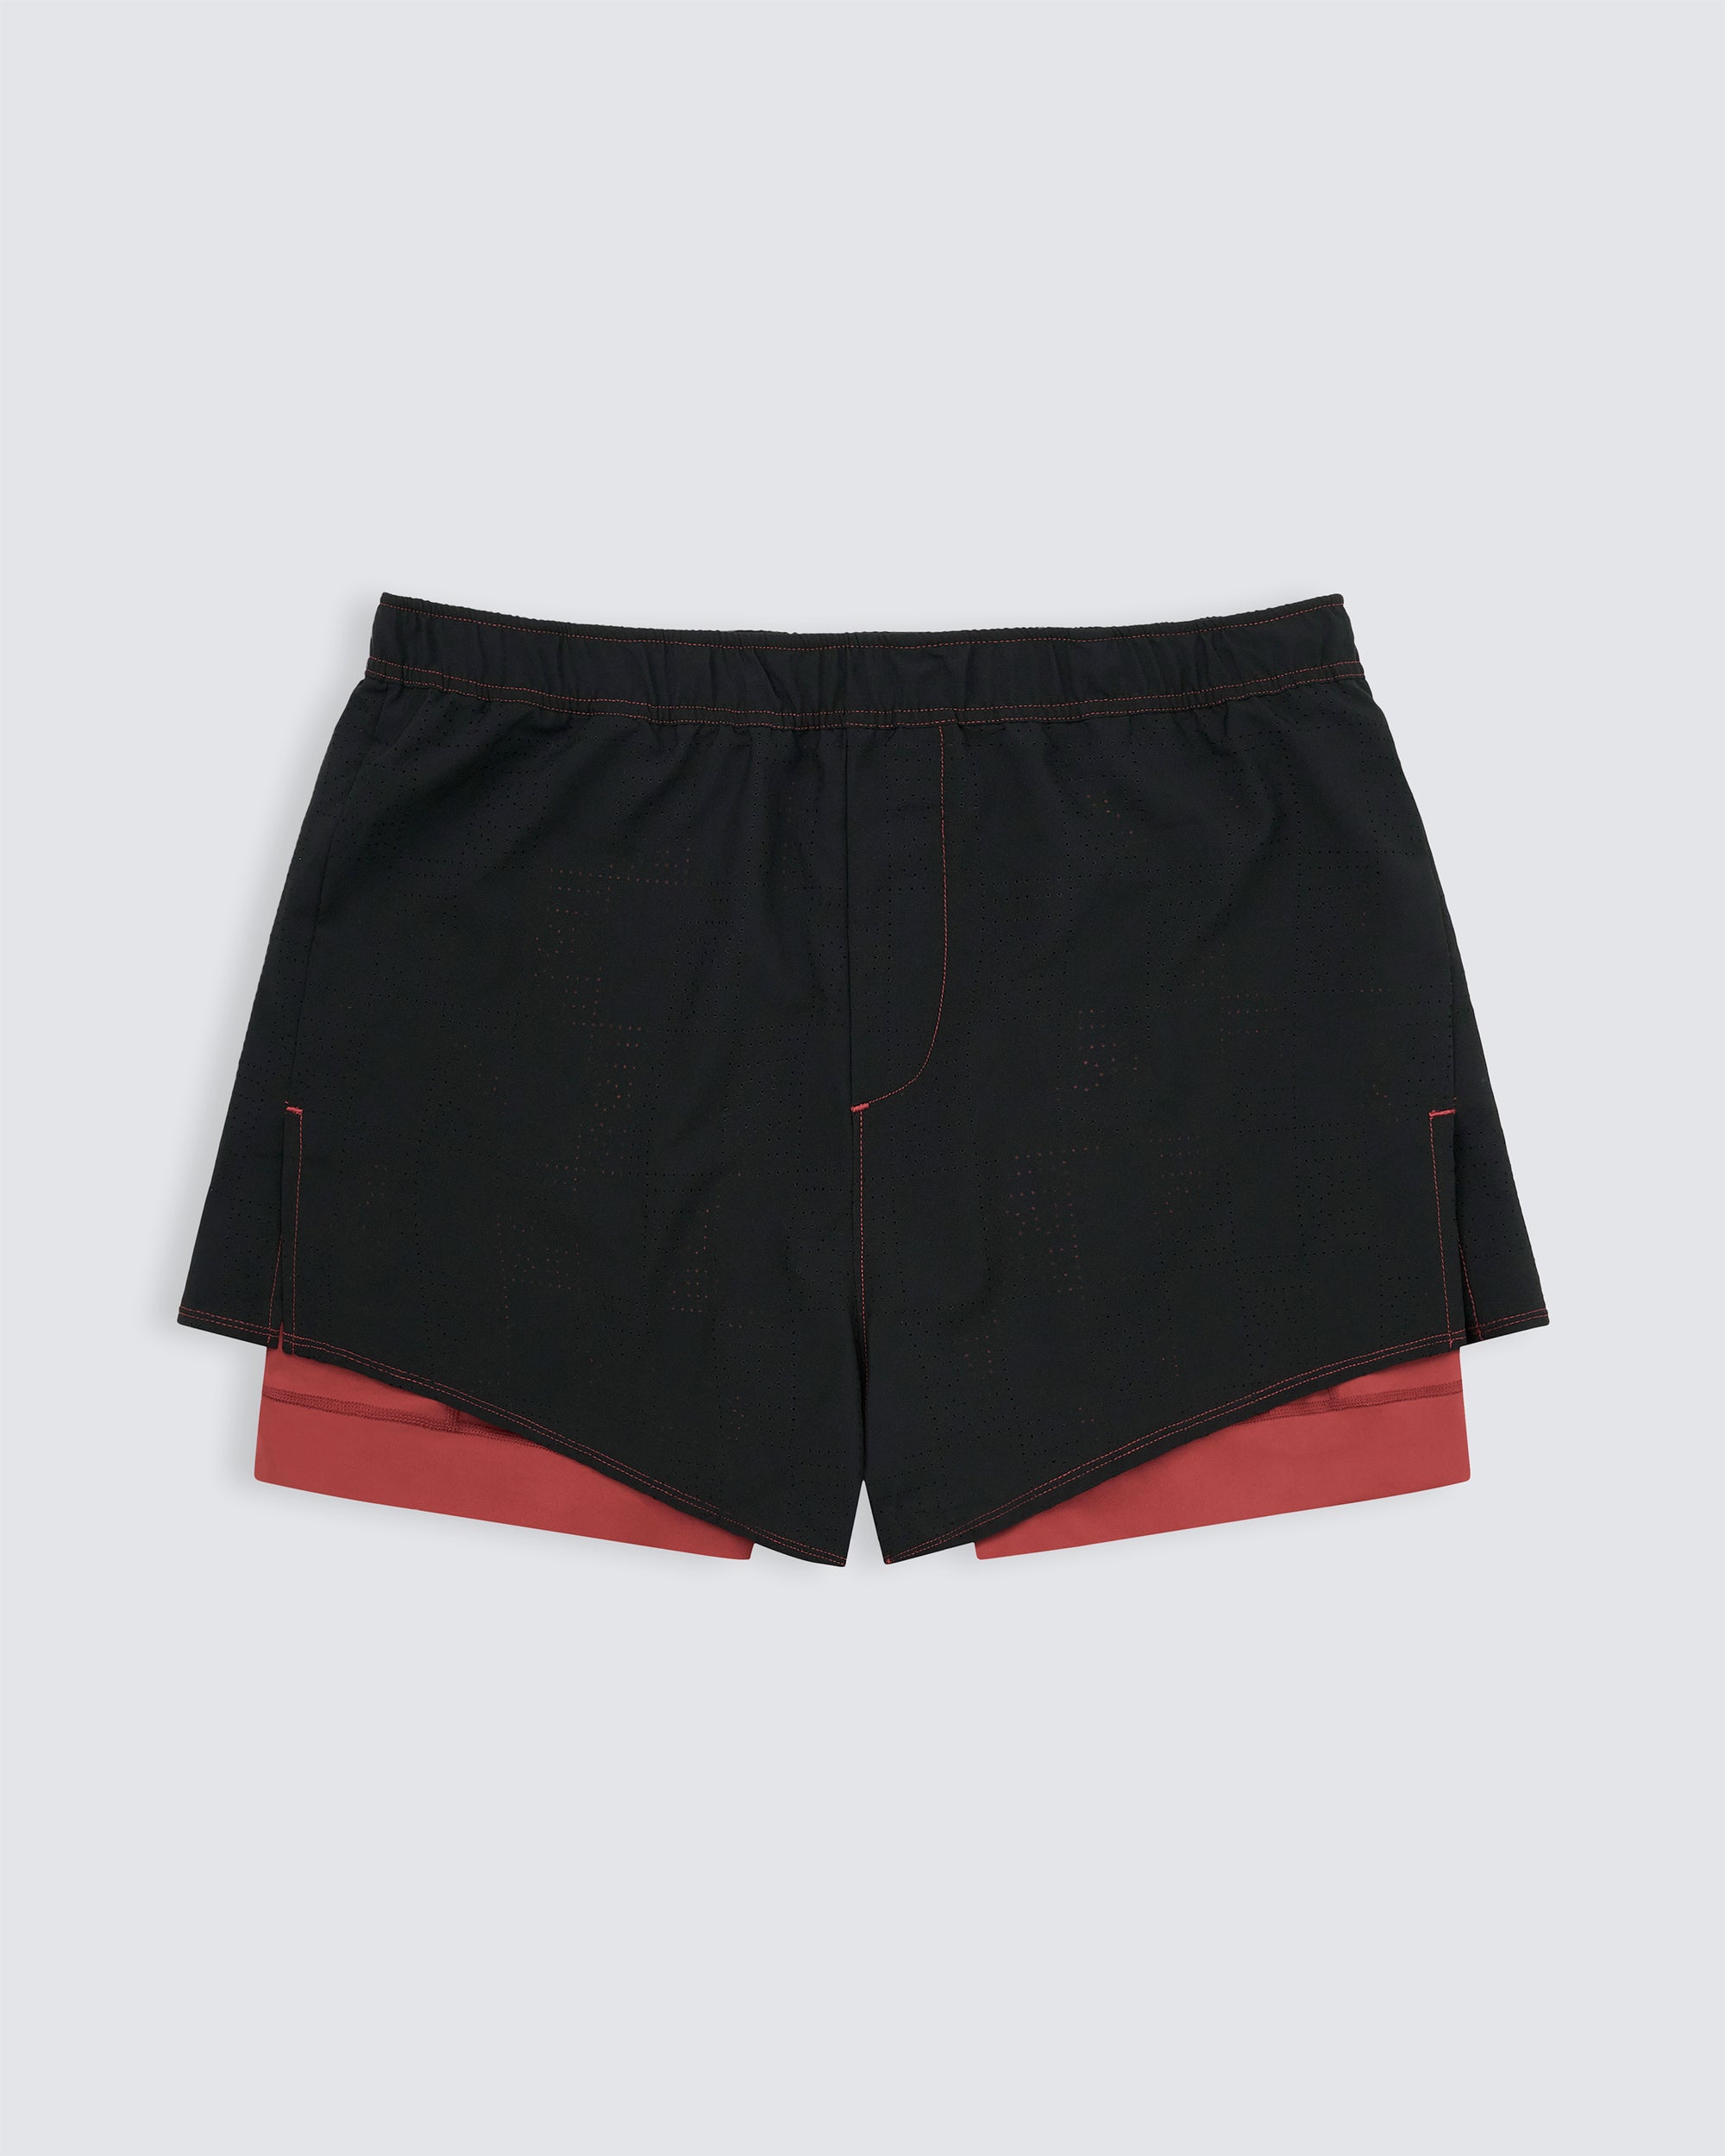 Sports shorts in black and red